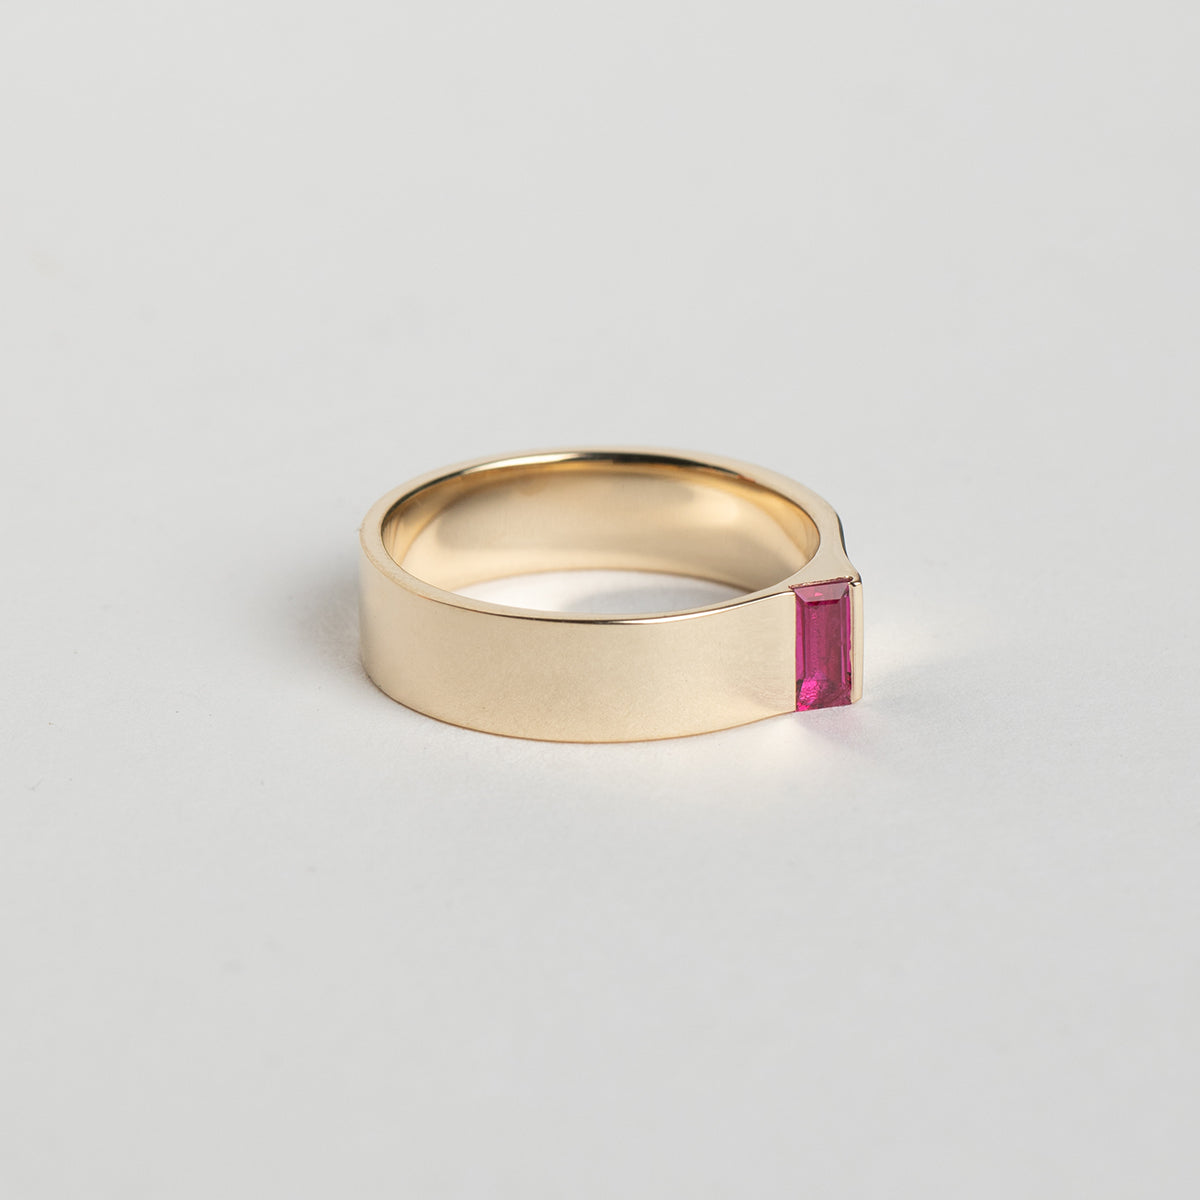 Designer Braga Handmade Ring in 14 karat yellow gold set with a baguette cut precious ruby gemstone by SHW Fine Jewelry made in New York City